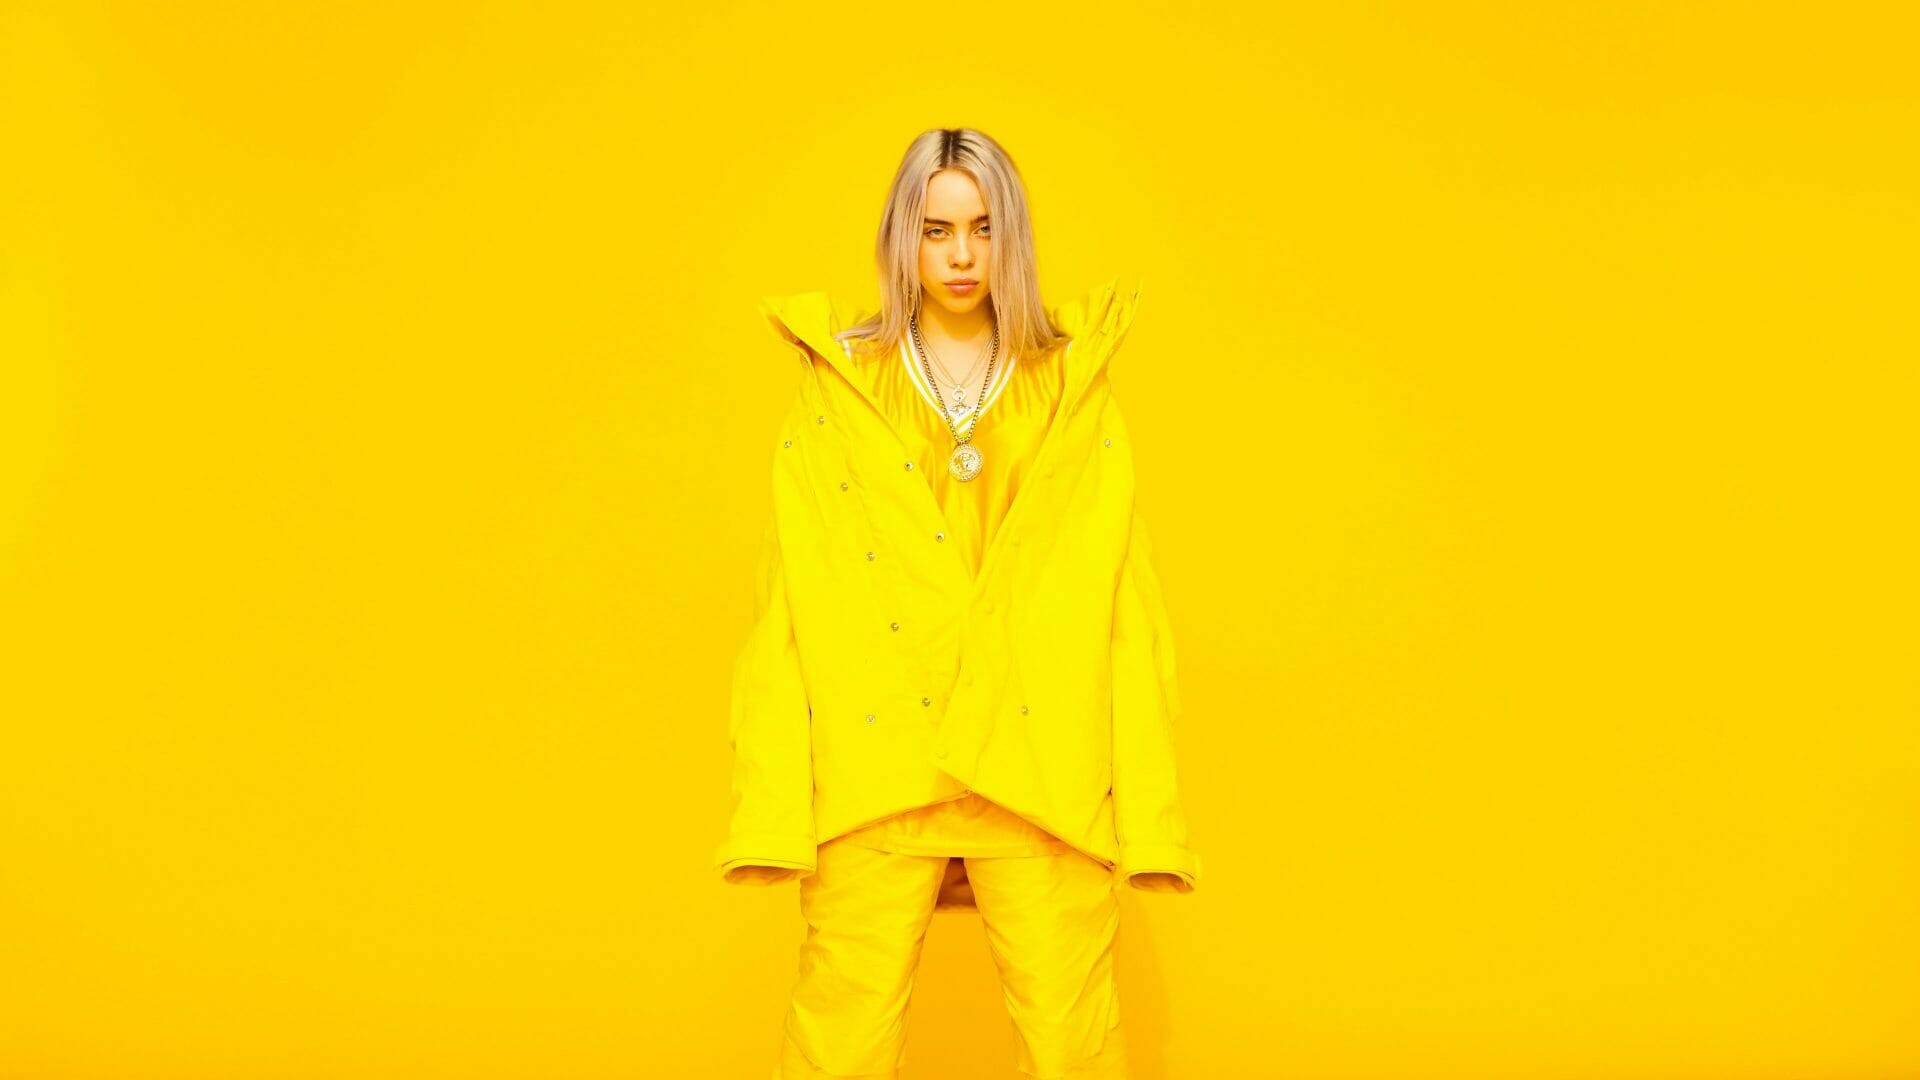 Billie Eilish: The youngest female solo artist to score a number one album in the UK. 1920x1080 Full HD Wallpaper.